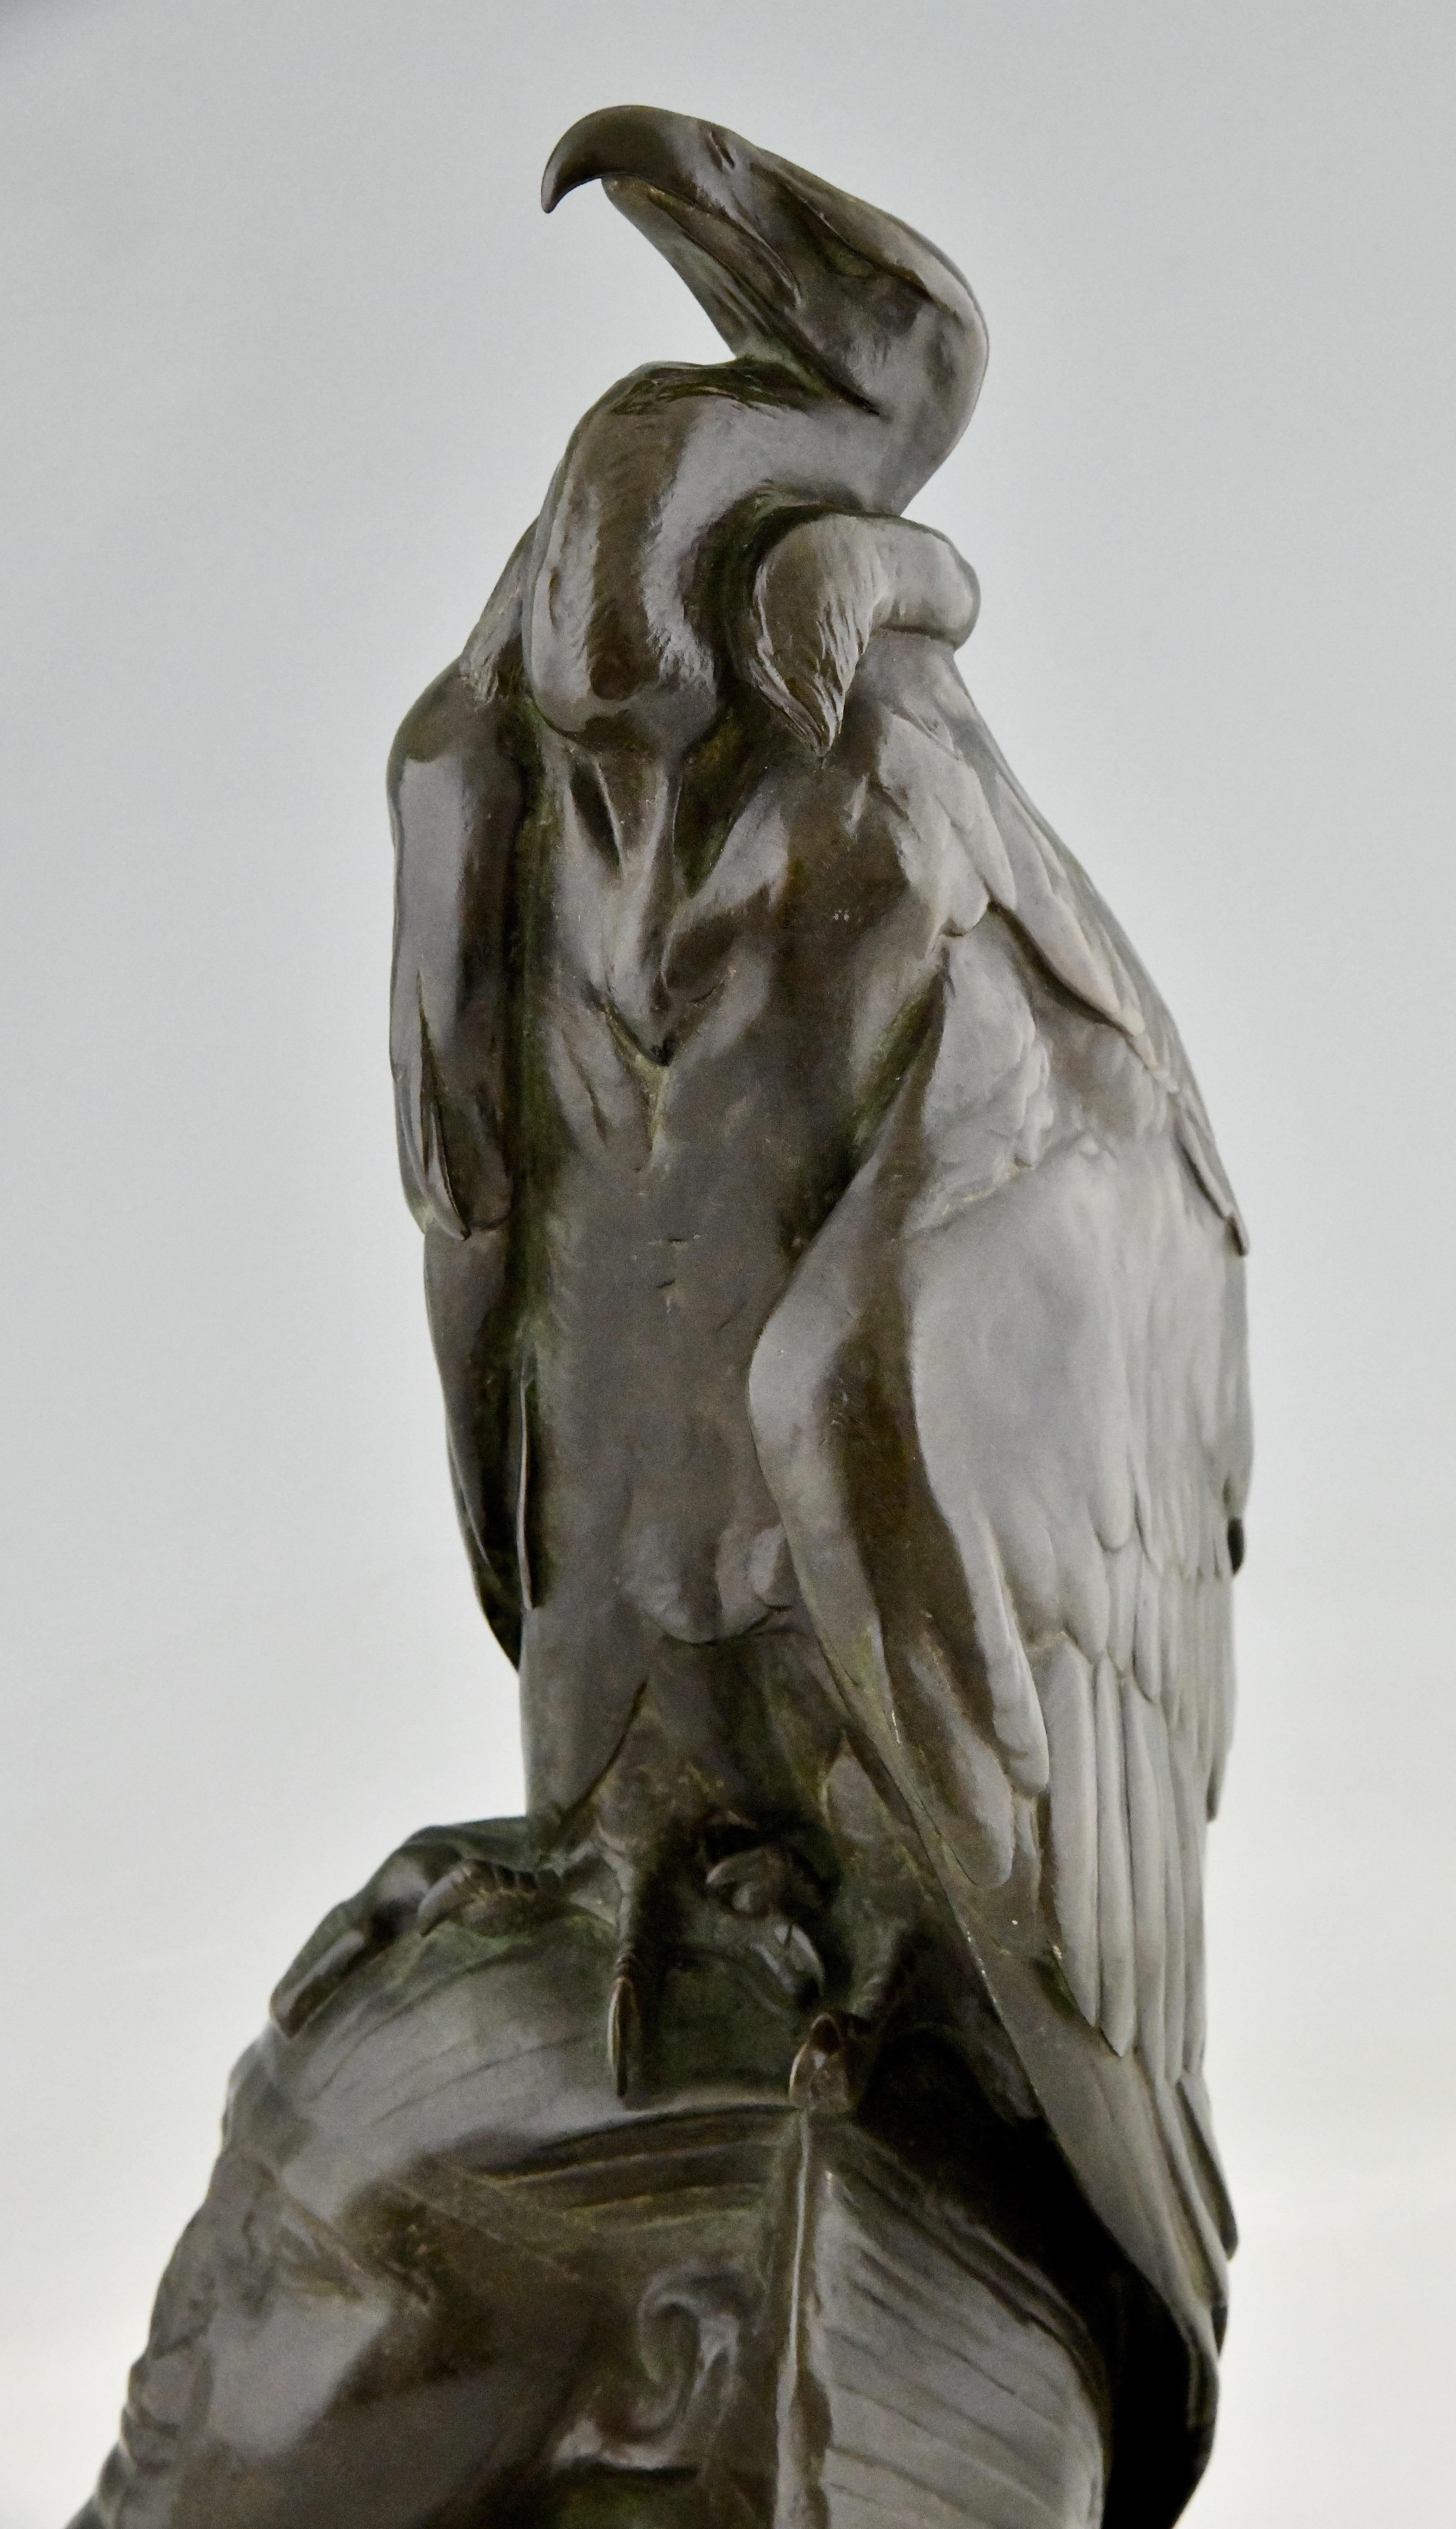 French Antique bronze sculpture of a vulture on a sphinx by Cain, France 1851.